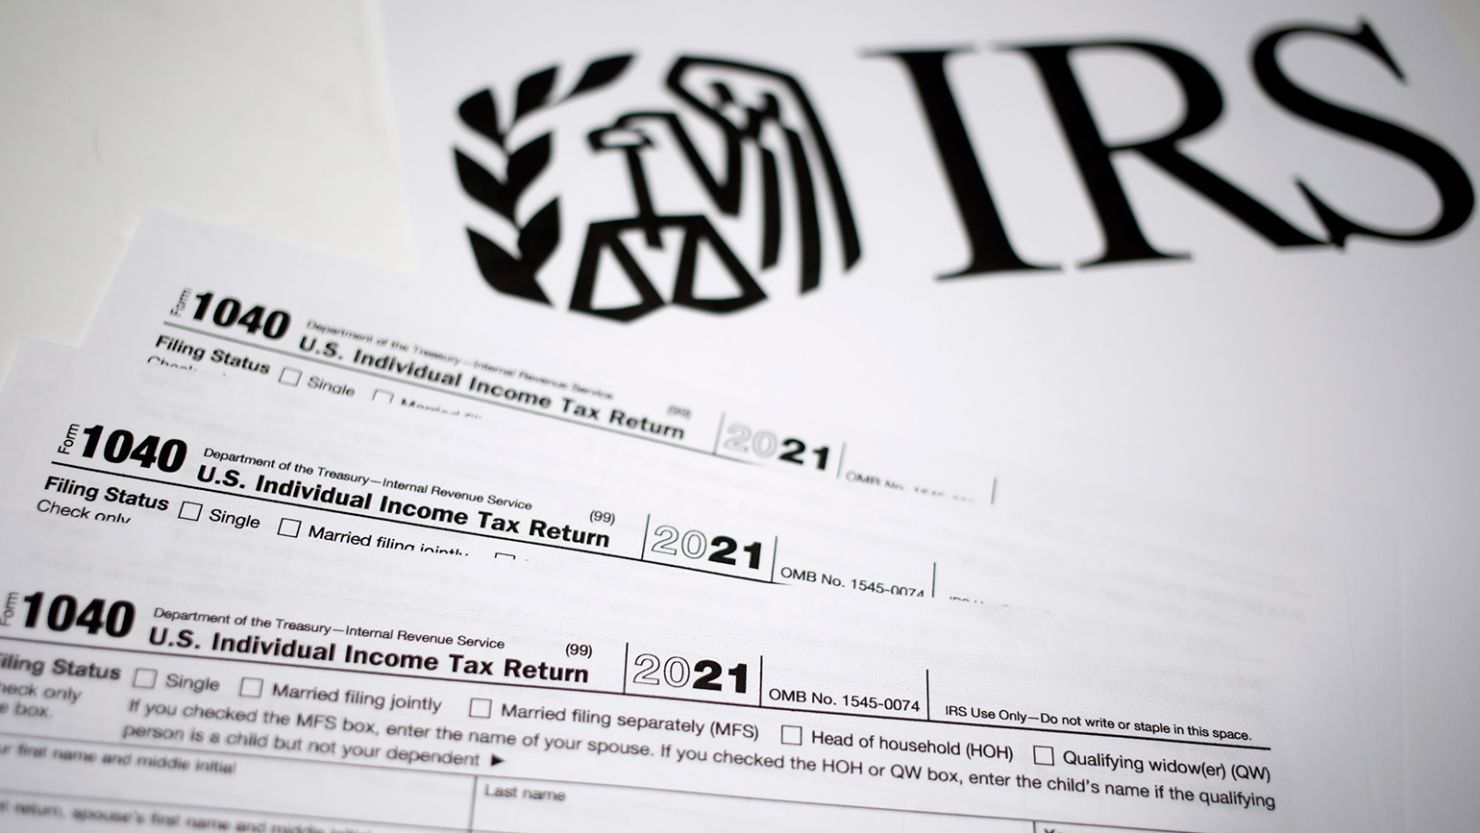 Internal Revenue Service 1040 Individual income tax forms for 2021 arranged in Louisville, Kentucky, U.S., on Tuesday, April 12, 2022.